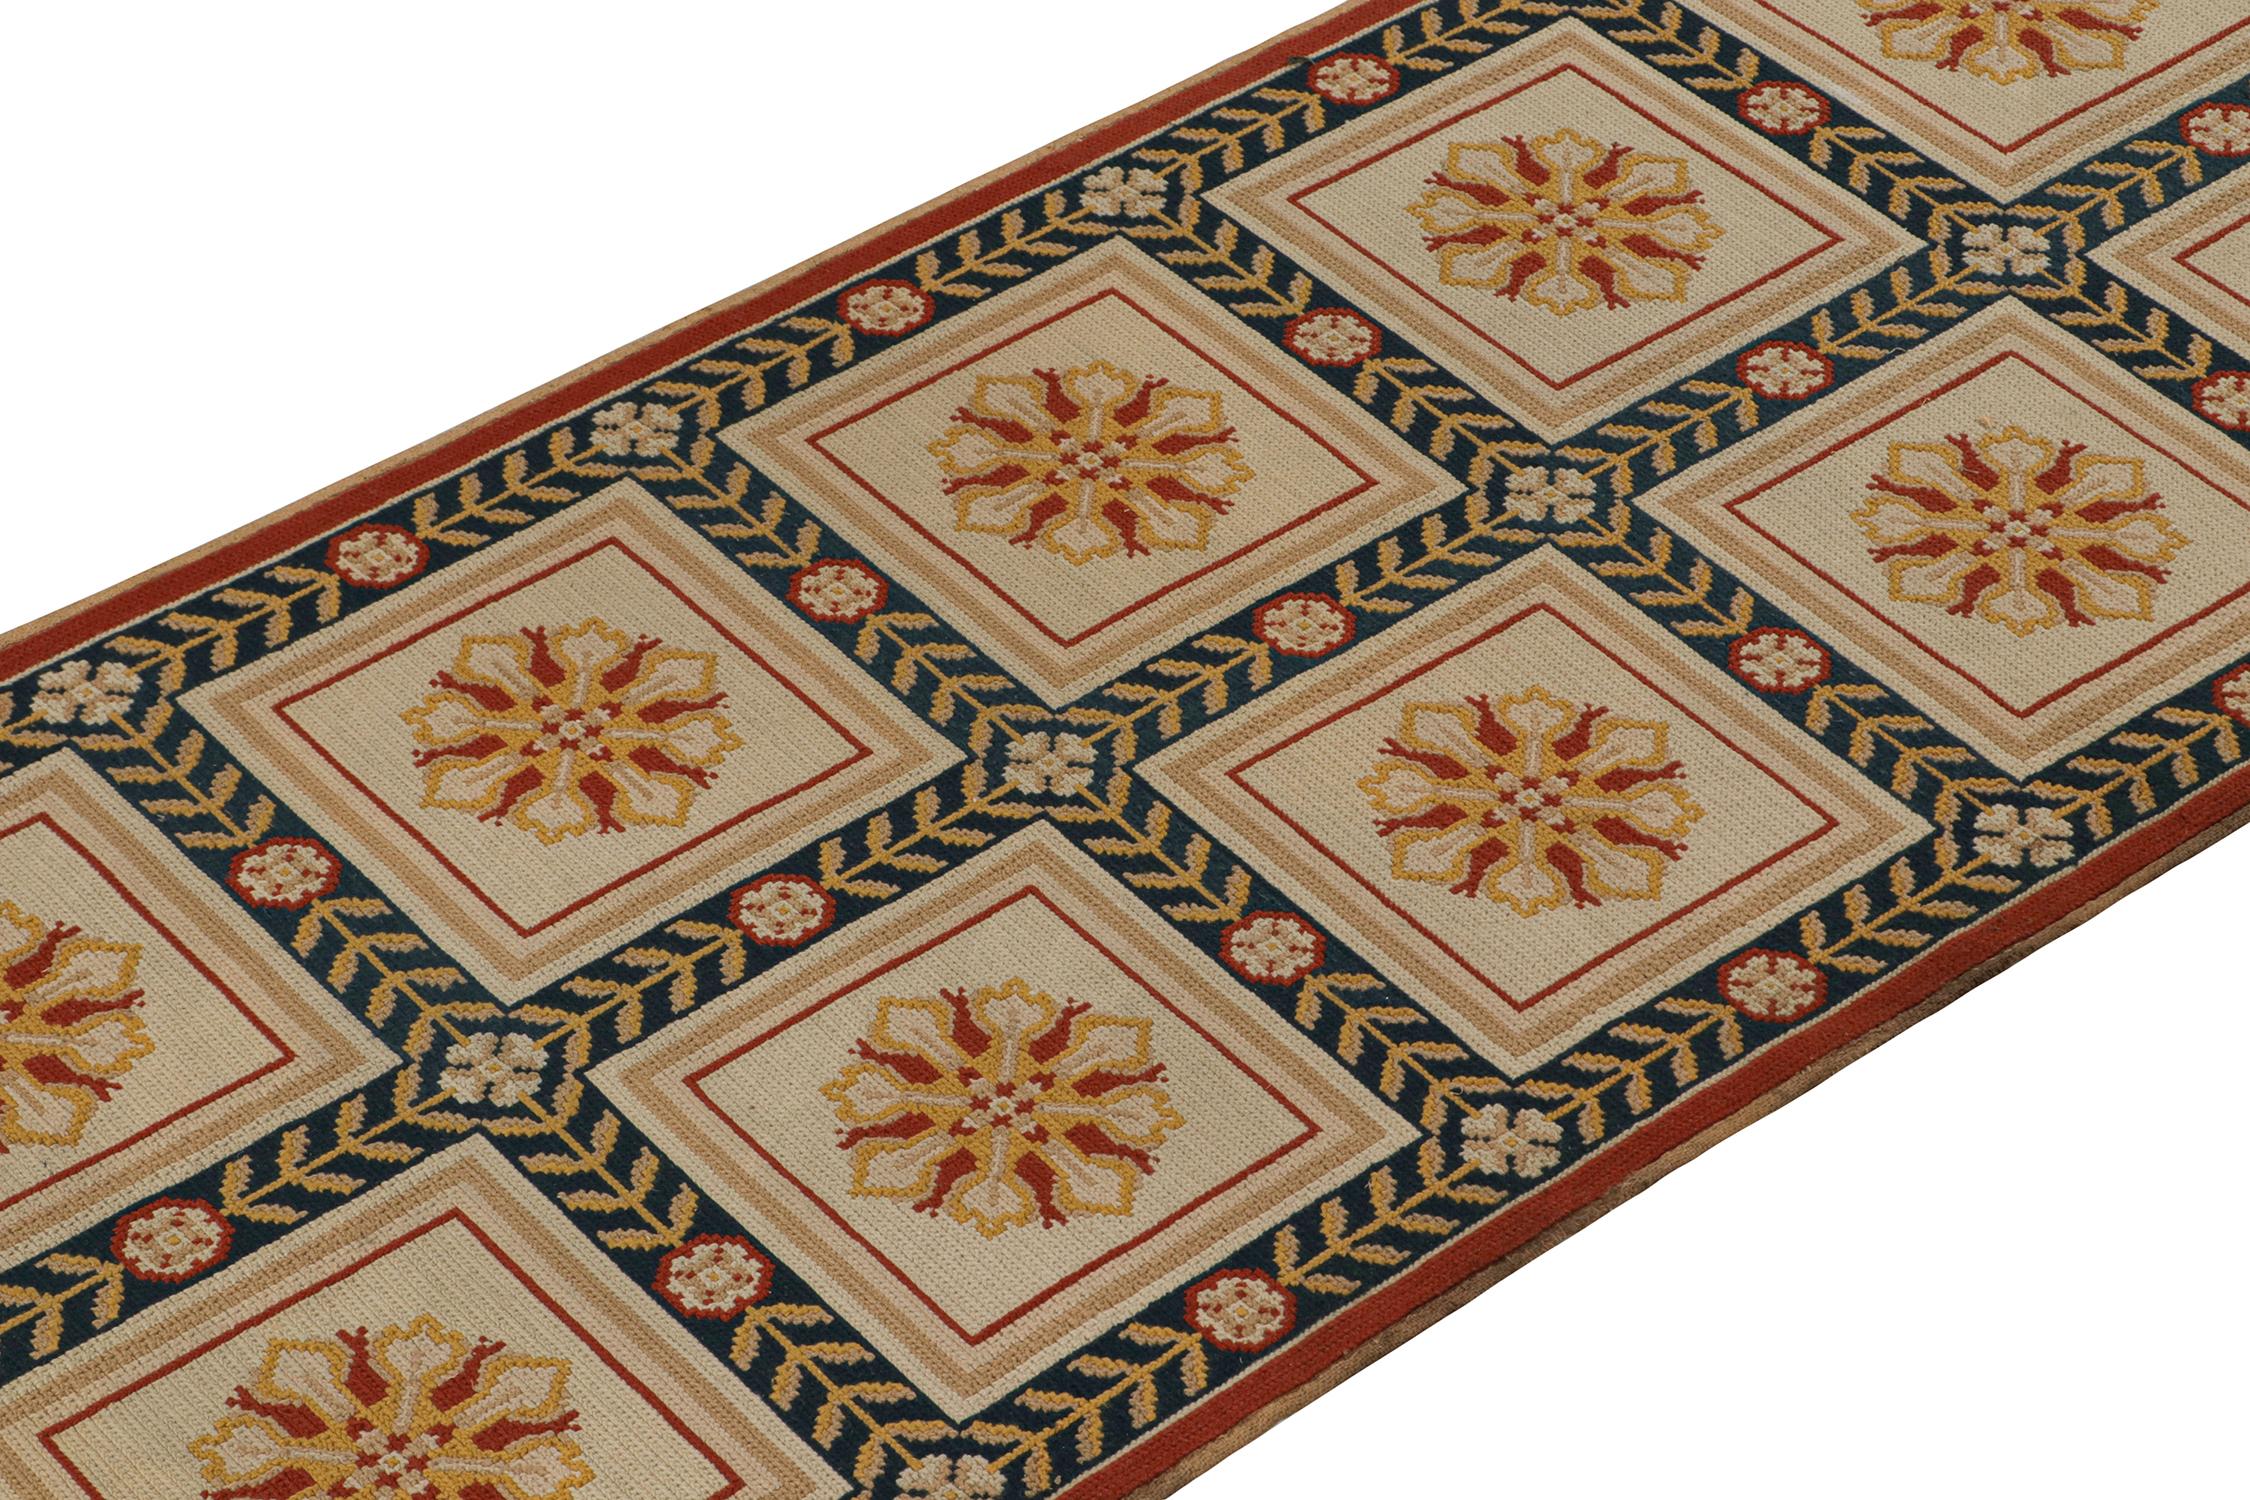 Hand-Knotted Vintage Arraiolos Needlepoint Runners in Beige Floral Medallions by Rug & Kilim For Sale